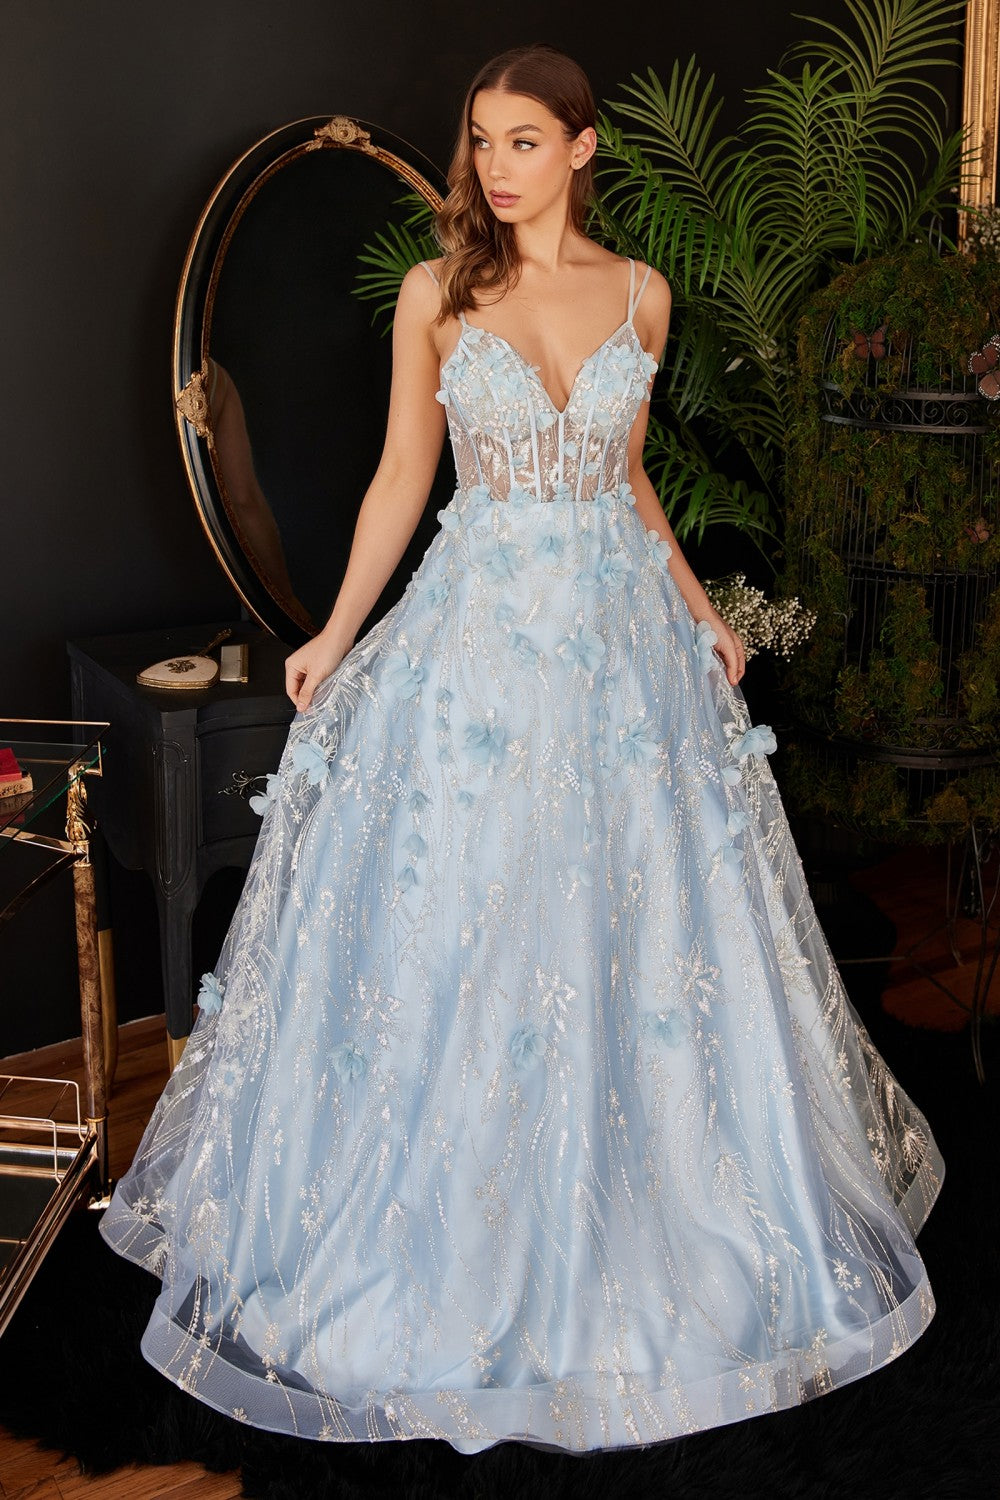 Blue Jewel Floral Applique Ball Gown CB105 - Women Evening Formal Gown - Special Occasion